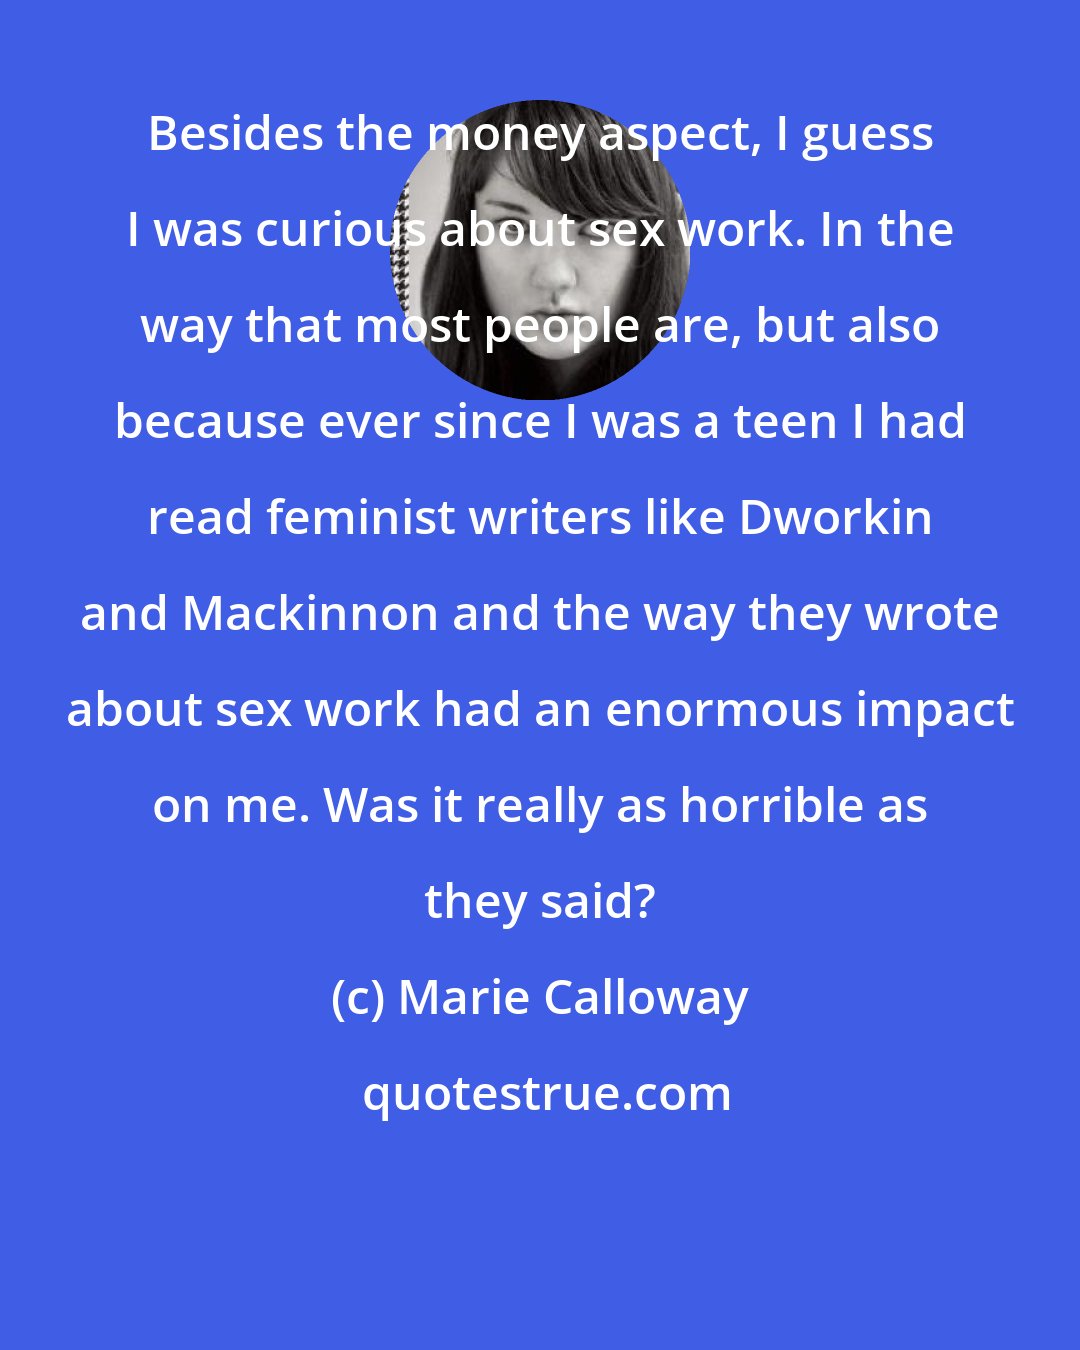 Marie Calloway: Besides the money aspect, I guess I was curious about sex work. In the way that most people are, but also because ever since I was a teen I had read feminist writers like Dworkin and Mackinnon and the way they wrote about sex work had an enormous impact on me. Was it really as horrible as they said?